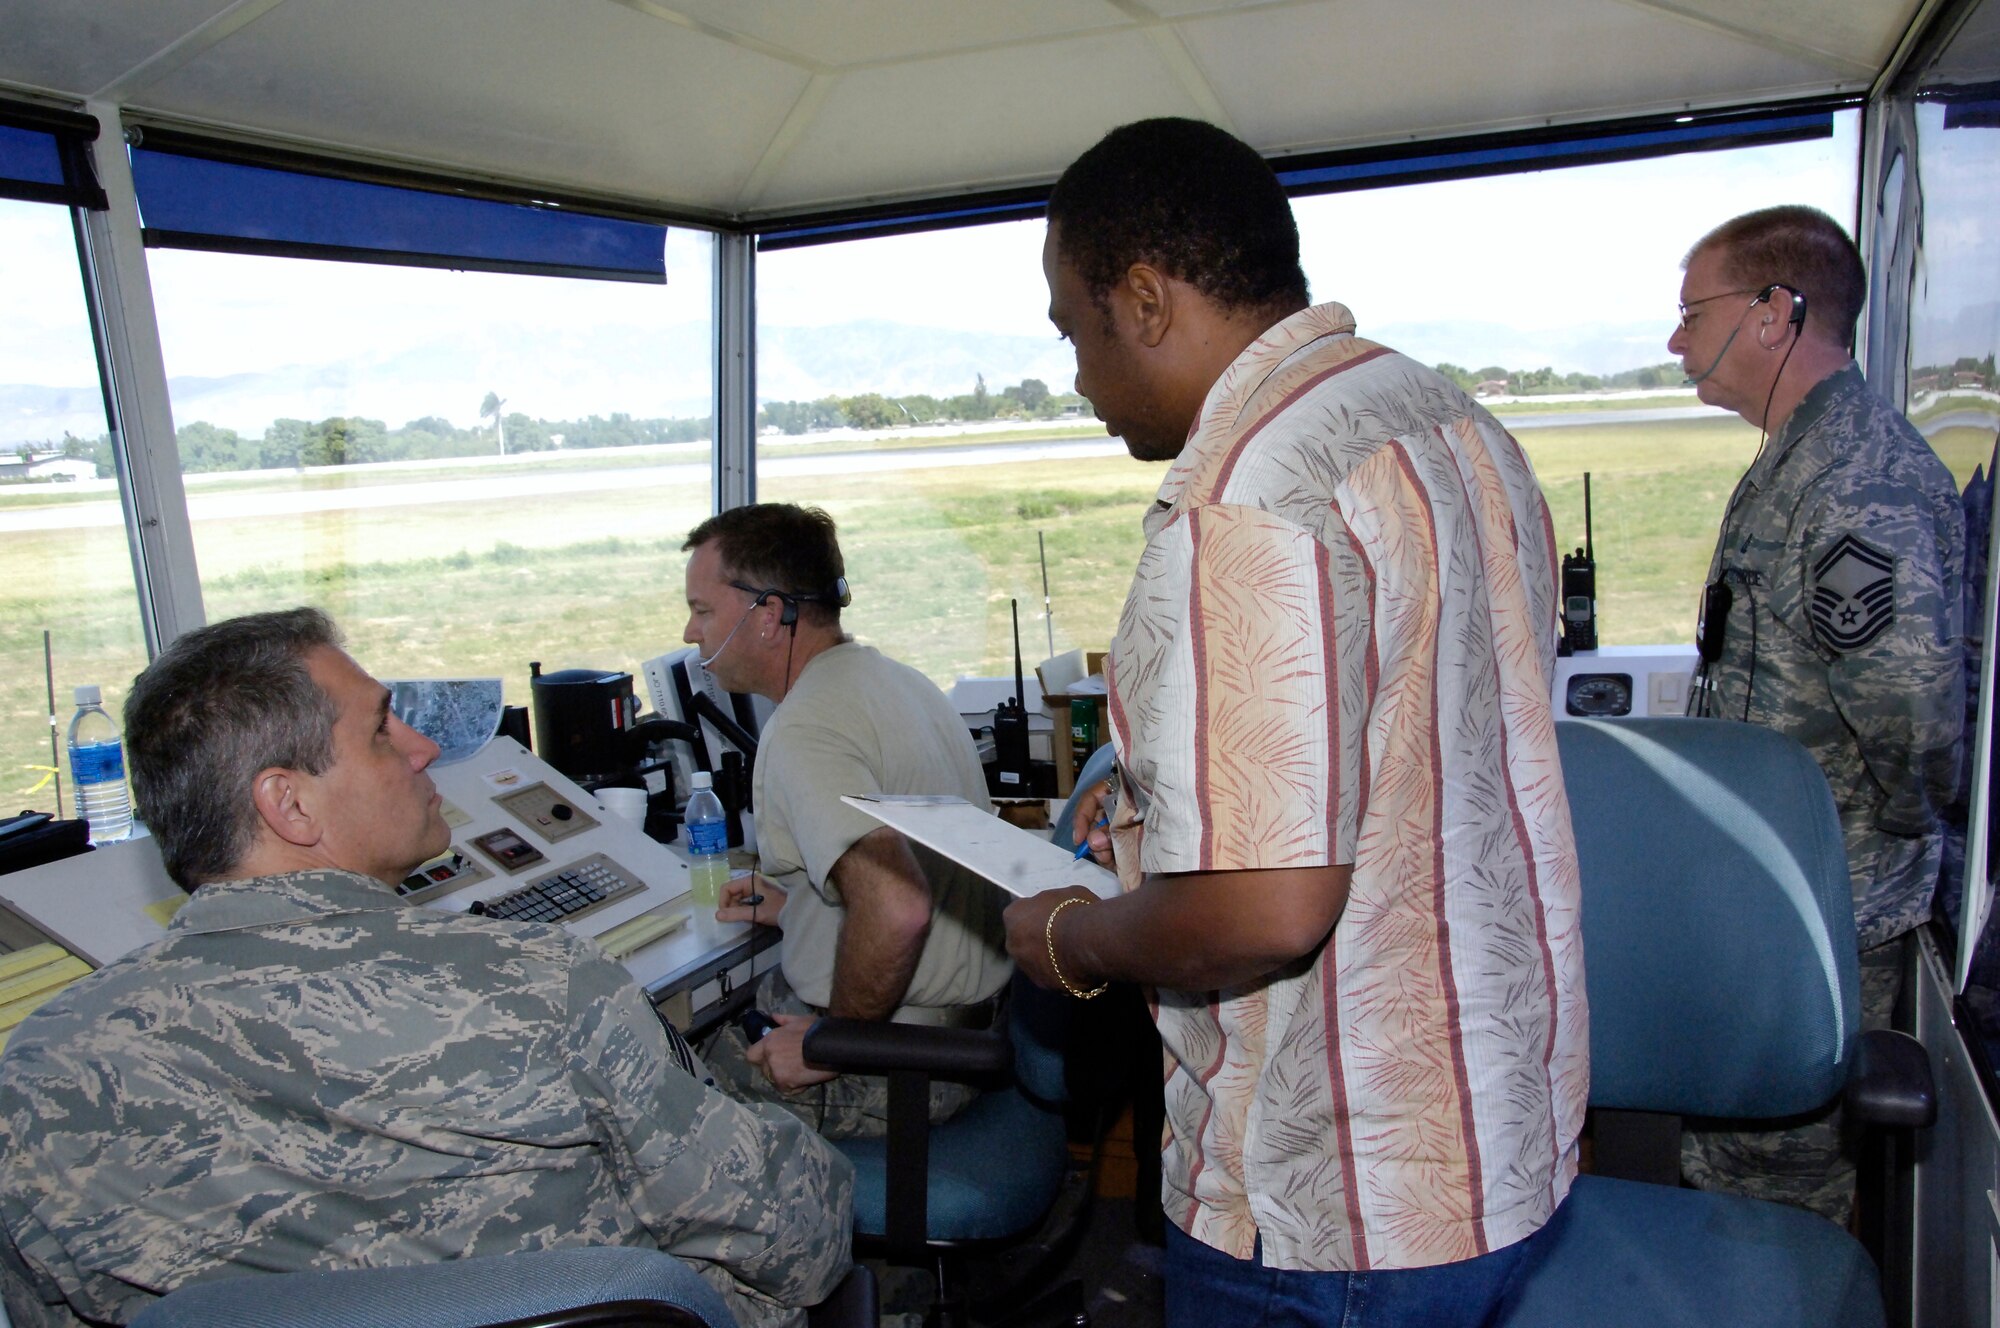 Reginald Bailey, Haitian air traffic control receives familiaization instruction from Air Force air traffic controllers in the mobile tower Feb. 1. The transition is currently taking place to hand over the tower and all flight operations responsibilities over to the Haitians.